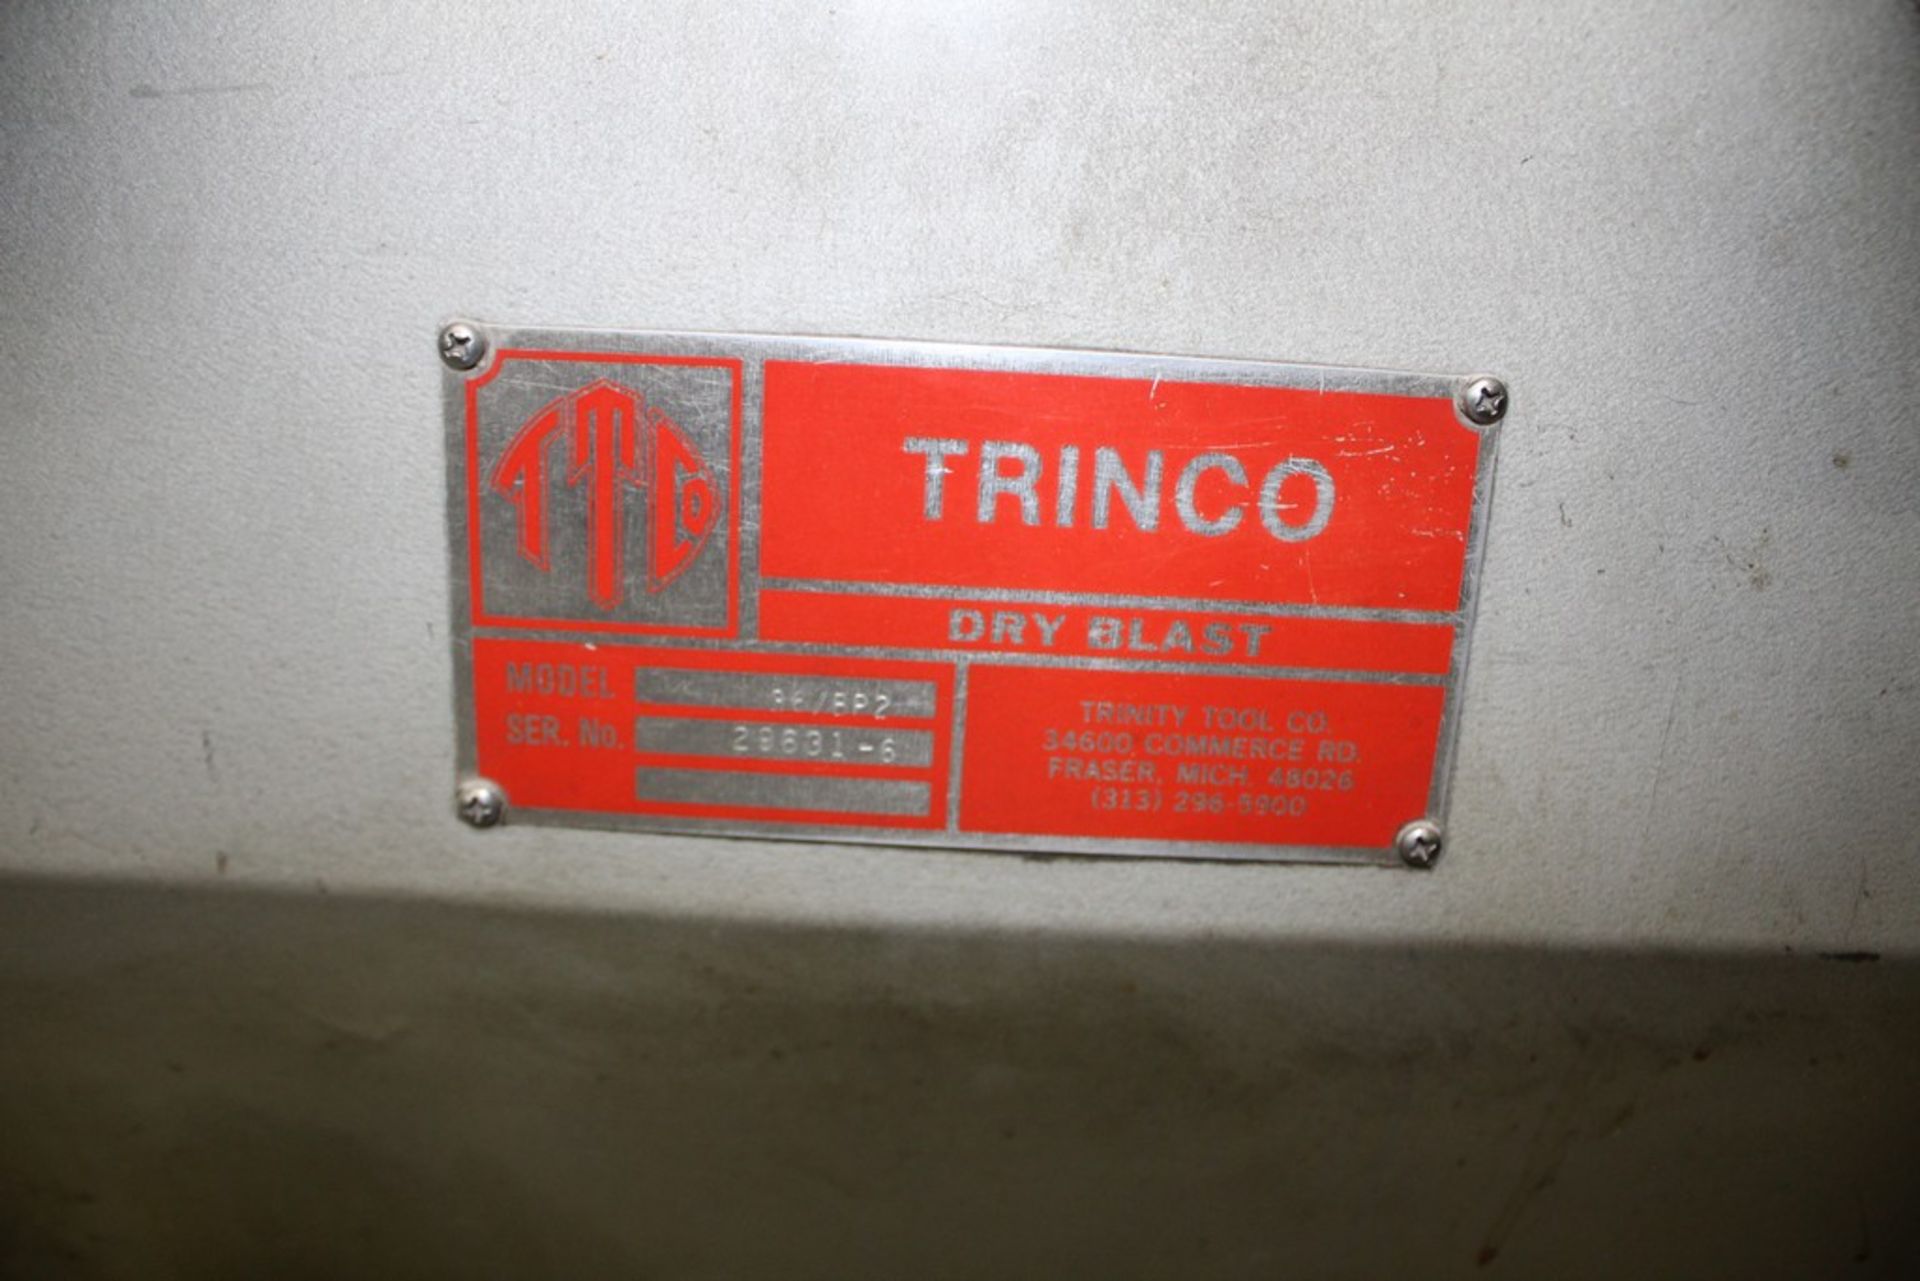 TRINCO MODEL 36/BP2 DRY BLAST CABINET, S/N 29631-6 WITH COLLECTOR - Image 2 of 4